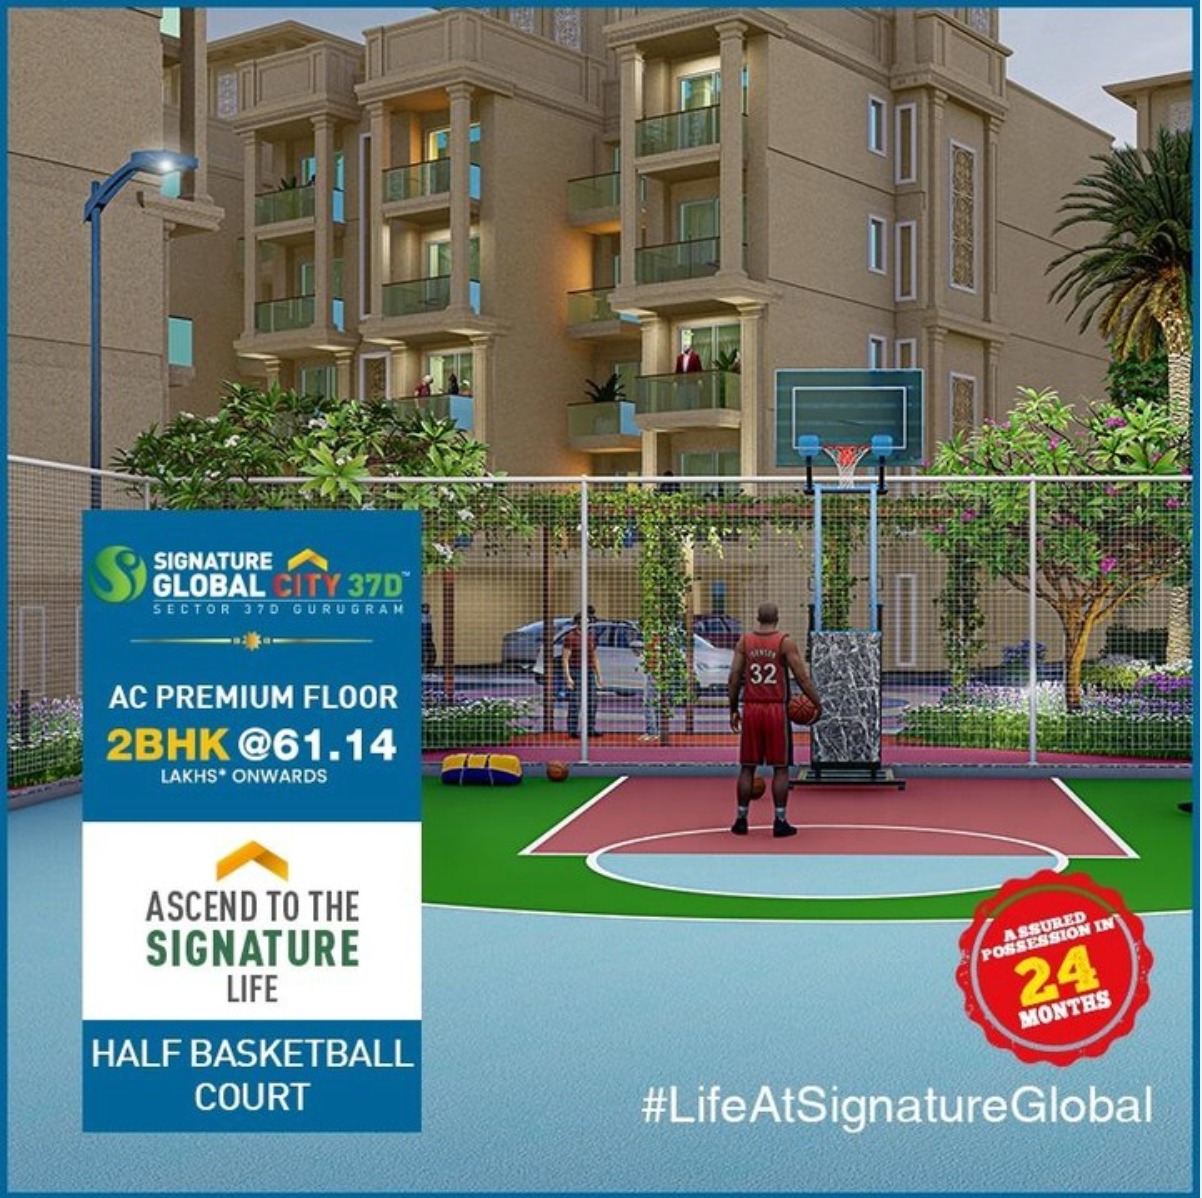 Signature Global offering 2 BHK @ Rs 61.14 Lacs* + Half Basketball Court in Sector 37 Gurgaon